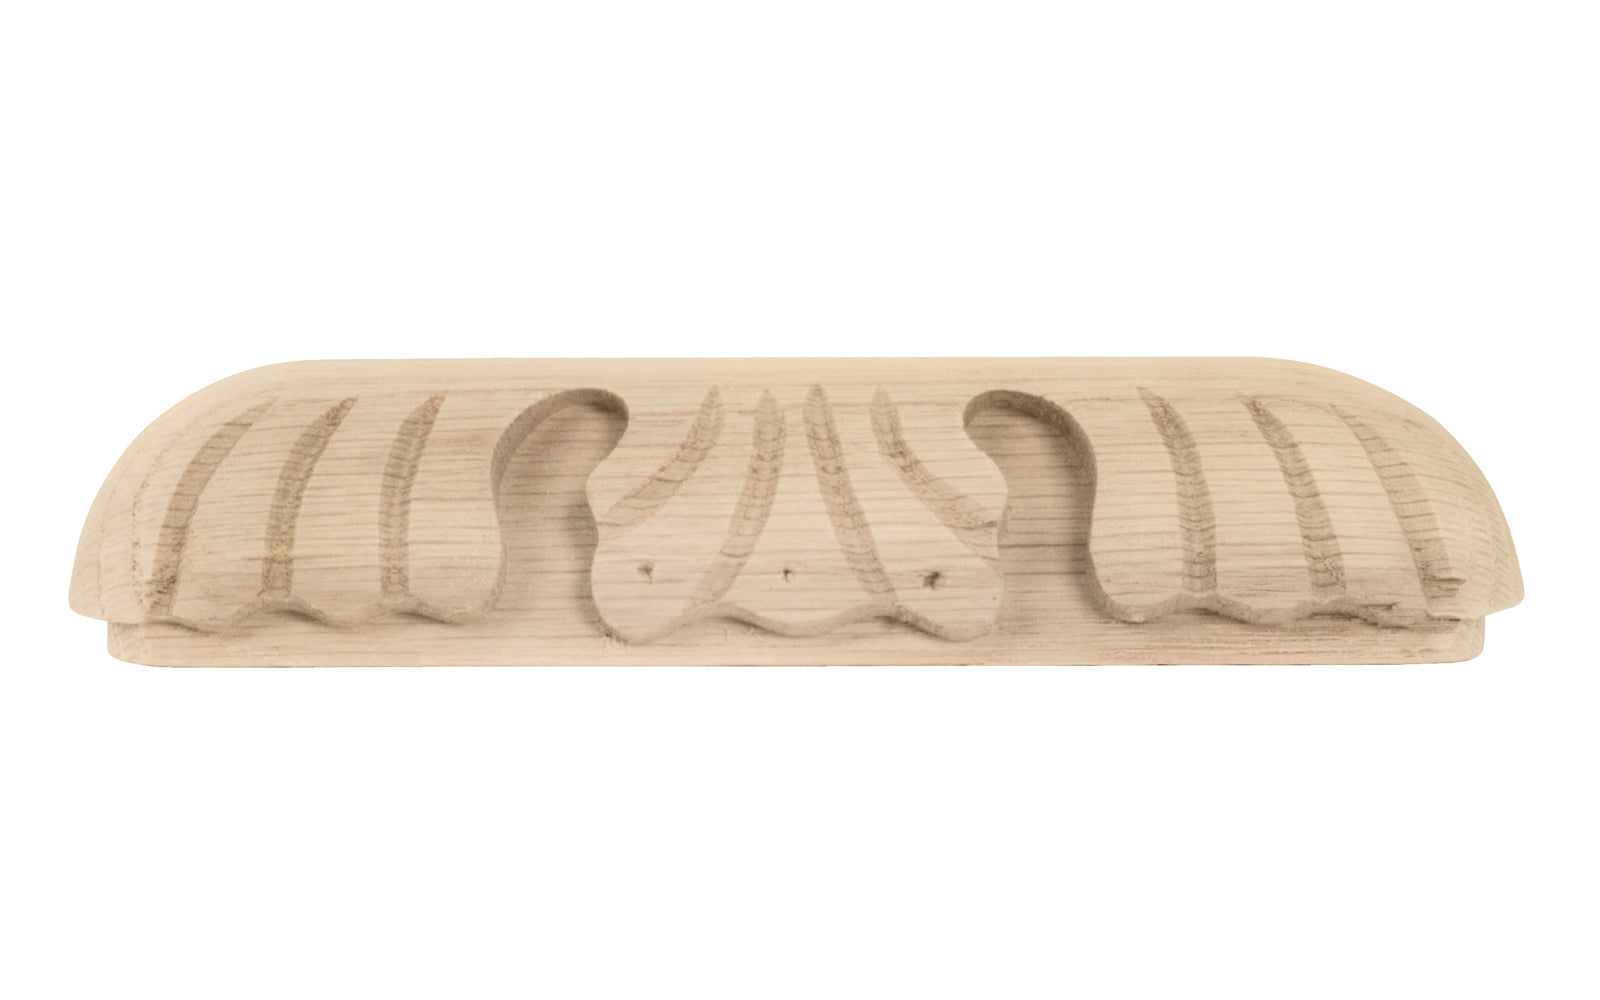 A traditional & intricate design carved oak wood handle pull with 5-1/2" on centers. Made of unfinished solid oak wood, this handle has a smooth feel & nice-looking grain to it. It may even be stained, painted, or varnished if desired. 5-1/2" spacing of screw holes. Solid oak pull.